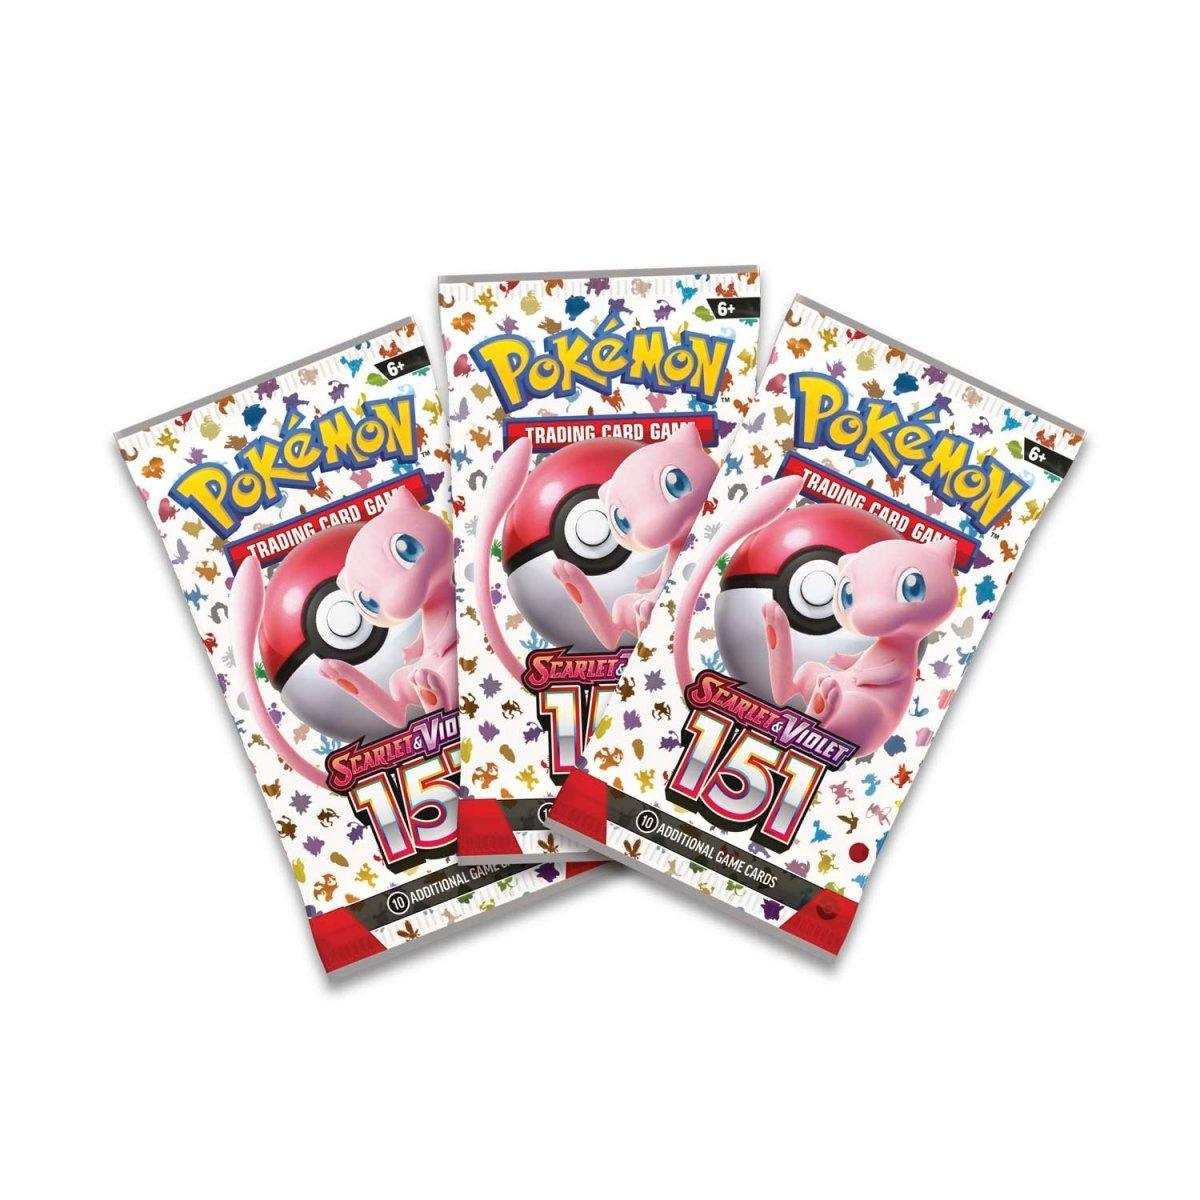 Pokemon Poster Collection Box - Scarlet & Violet - 151 - Hobby Champion Inc